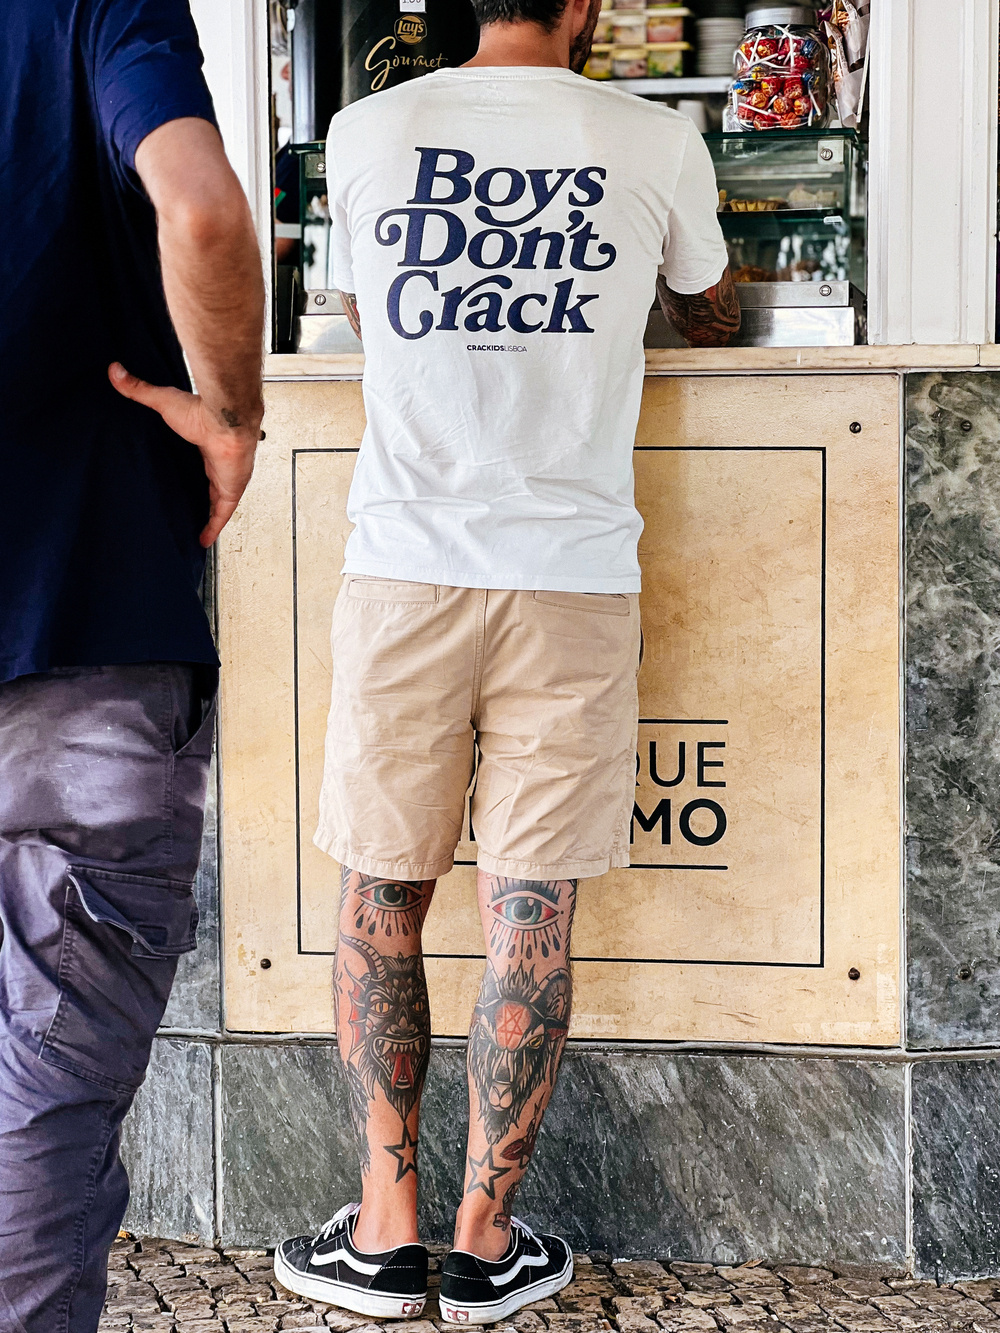 A tattooed gentlemen at a kiosk. His t-shirt reads “Boys Don’t Crack”. 